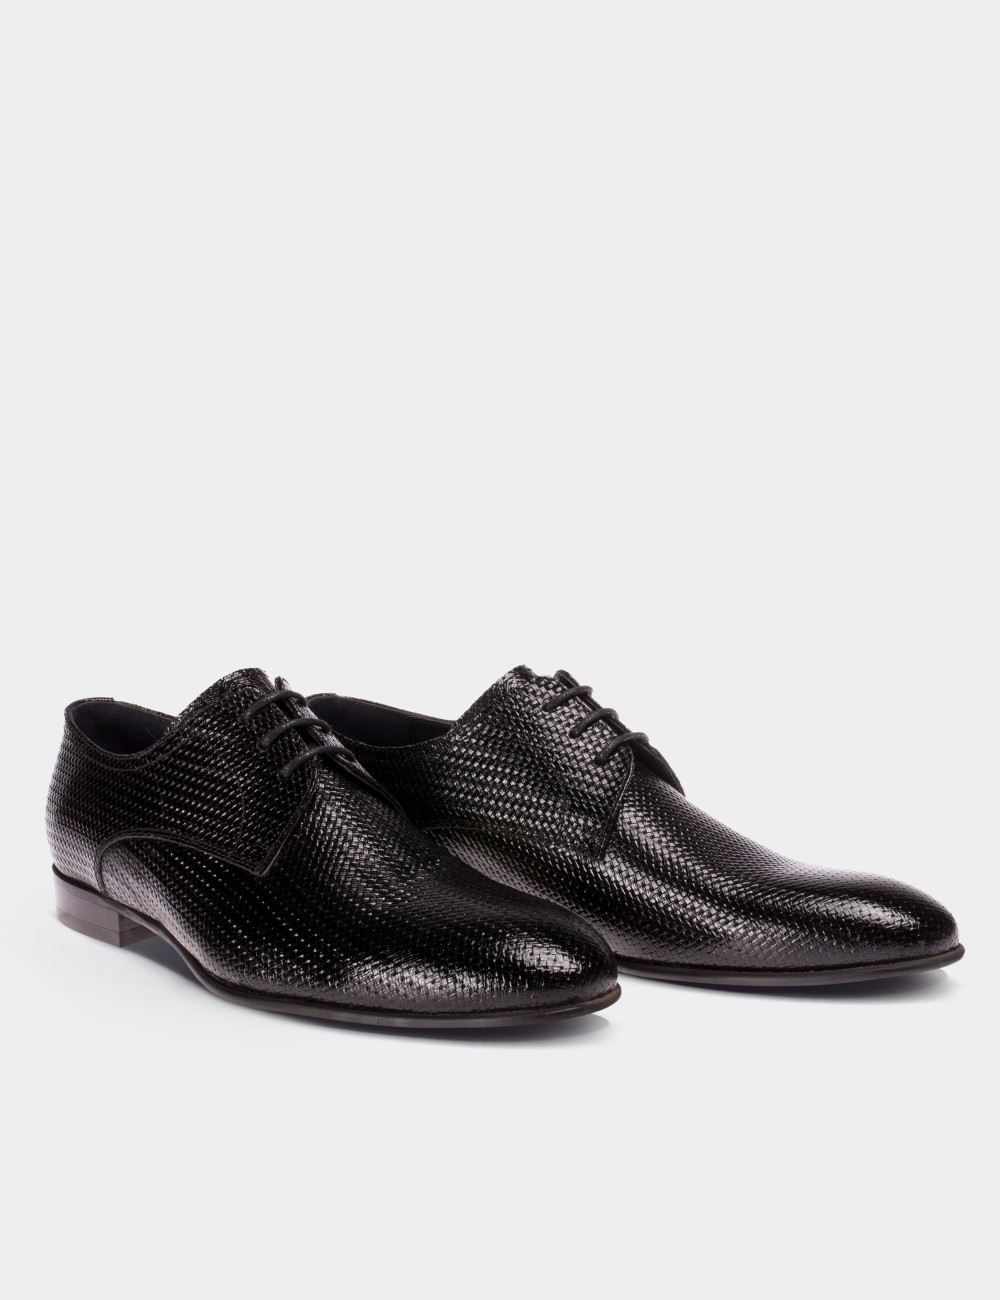 Black Patent Leather Classic Shoes - 00479MSYHM11